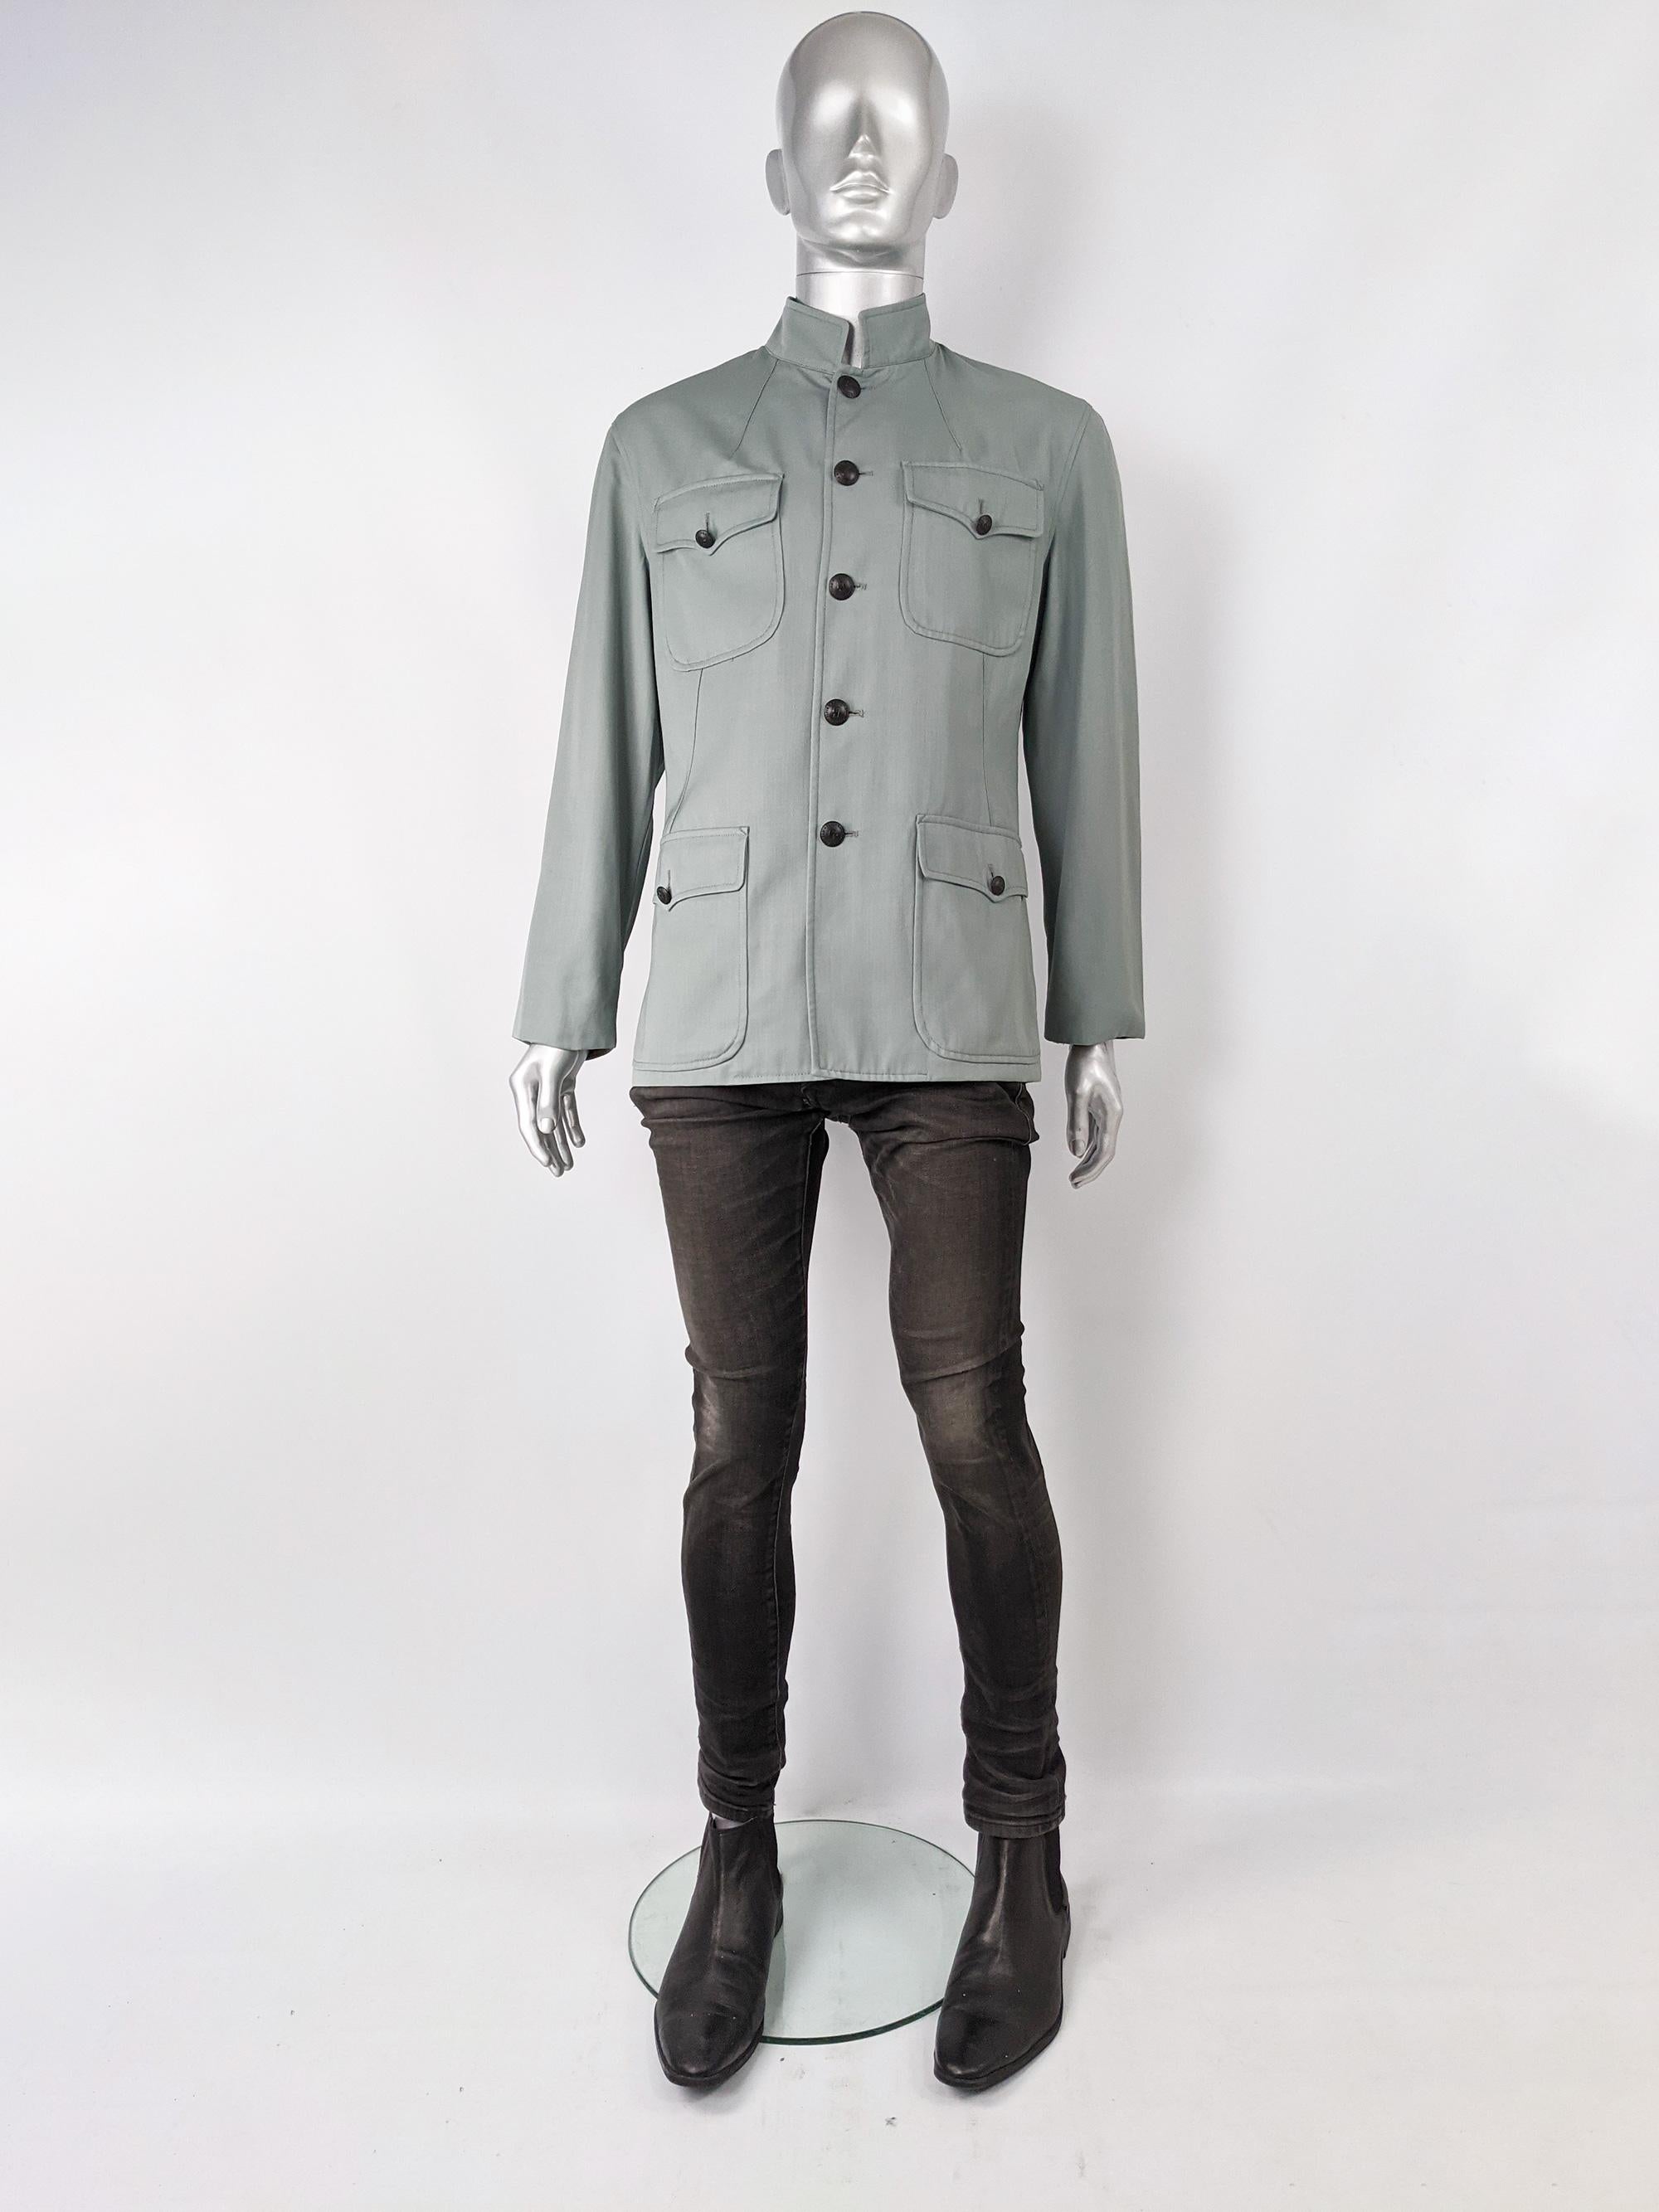 An excellent vintage men's Jean Paul Gaultier jacket from the 1990s in a pale military green with a nehru collar and multiple utility flap patch pockets on the front. Perfect for spring.
 
Size: Marked I 52 / E 52 / GB 42 / US 42 which is roughly a